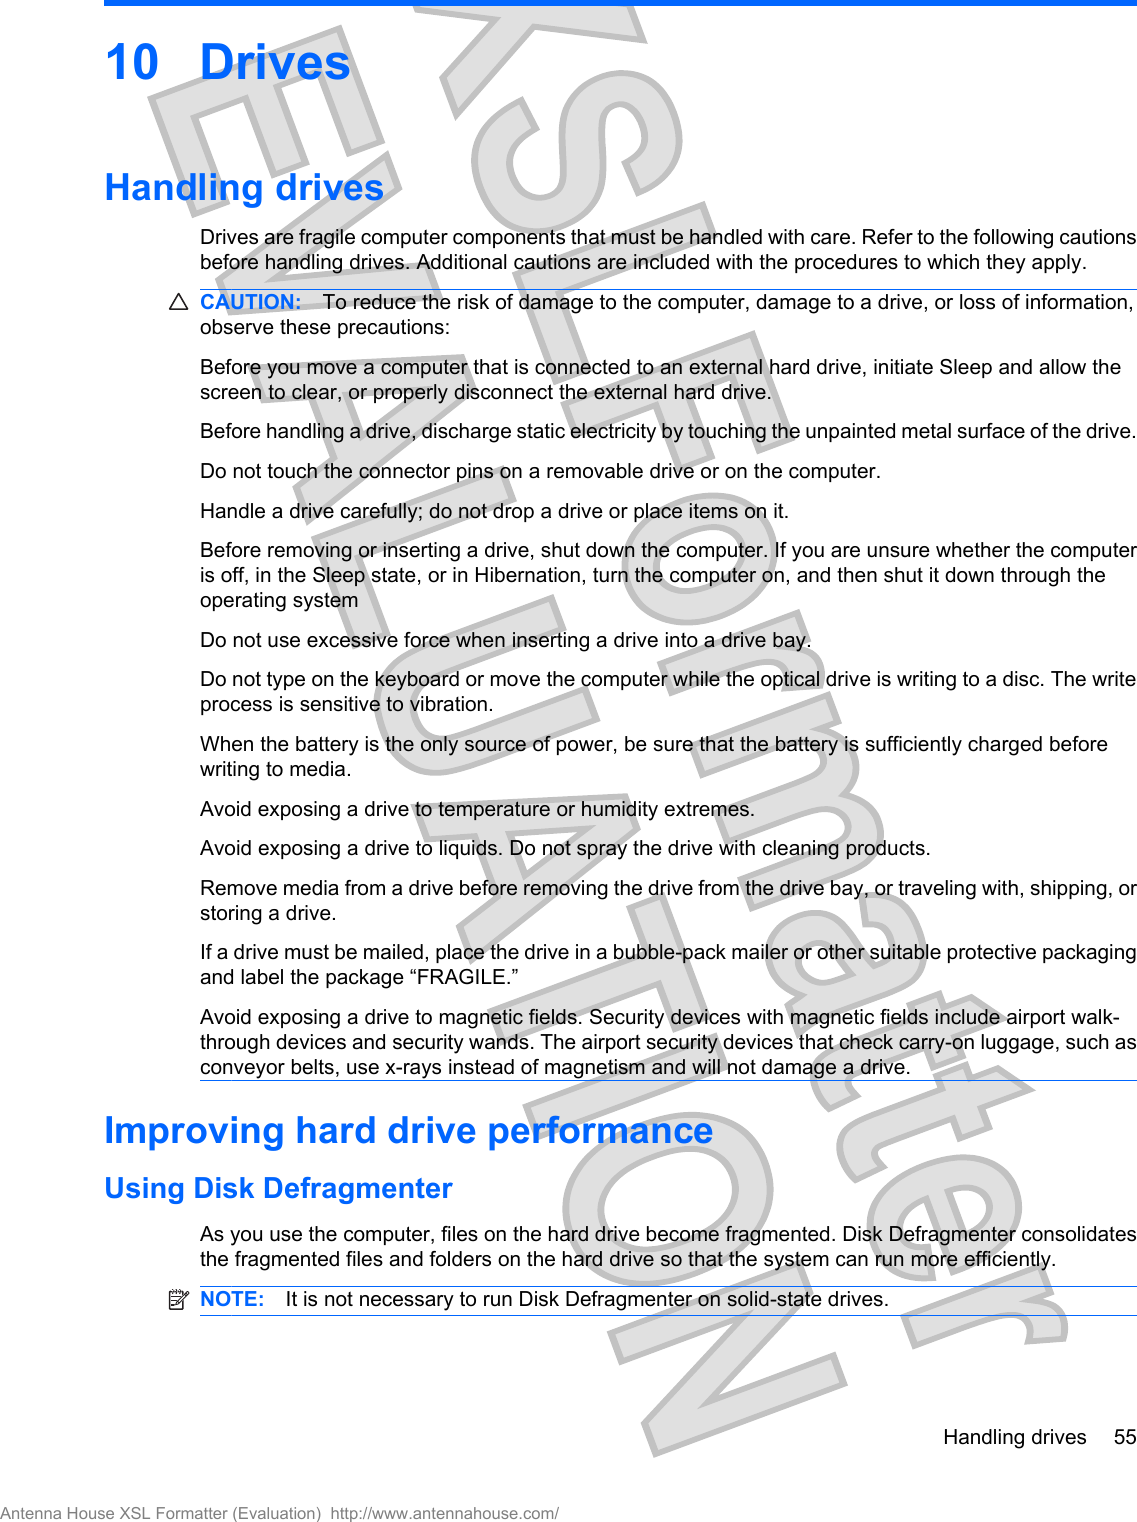 10 DrivesHandling drivesDrives are fragile computer components that must be handled with care. Refer to the following cautionsbefore handling drives. Additional cautions are included with the procedures to which they apply.CAUTION: To reduce the risk of damage to the computer, damage to a drive, or loss of information,observe these precautions:Before you move a computer that is connected to an external hard drive, initiate Sleep and allow thescreen to clear, or properly disconnect the external hard drive.Before handling a drive, discharge static electricity by touching the unpainted metal surface of the drive.Do not touch the connector pins on a removable drive or on the computer.Handle a drive carefully; do not drop a drive or place items on it.Before removing or inserting a drive, shut down the computer. If you are unsure whether the computeris off, in the Sleep state, or in Hibernation, turn the computer on, and then shut it down through theoperating systemDo not use excessive force when inserting a drive into a drive bay.Do not type on the keyboard or move the computer while the optical drive is writing to a disc. The writeprocess is sensitive to vibration.When the battery is the only source of power, be sure that the battery is sufficiently charged beforewriting to media.Avoid exposing a drive to temperature or humidity extremes.Avoid exposing a drive to liquids. Do not spray the drive with cleaning products.Remove media from a drive before removing the drive from the drive bay, or traveling with, shipping, orstoring a drive.If a drive must be mailed, place the drive in a bubble-pack mailer or other suitable protective packagingand label the package “FRAGILE.”Avoid exposing a drive to magnetic fields. Security devices with magnetic fields include airport walk-through devices and security wands. The airport security devices that check carry-on luggage, such asconveyor belts, use x-rays instead of magnetism and will not damage a drive.Improving hard drive performanceUsing Disk DefragmenterAs you use the computer, files on the hard drive become fragmented. Disk Defragmenter consolidatesthe fragmented files and folders on the hard drive so that the system can run more efficiently.NOTE: It is not necessary to run Disk Defragmenter on solid-state drives.Handling drives 55Antenna House XSL Formatter (Evaluation)  http://www.antennahouse.com/